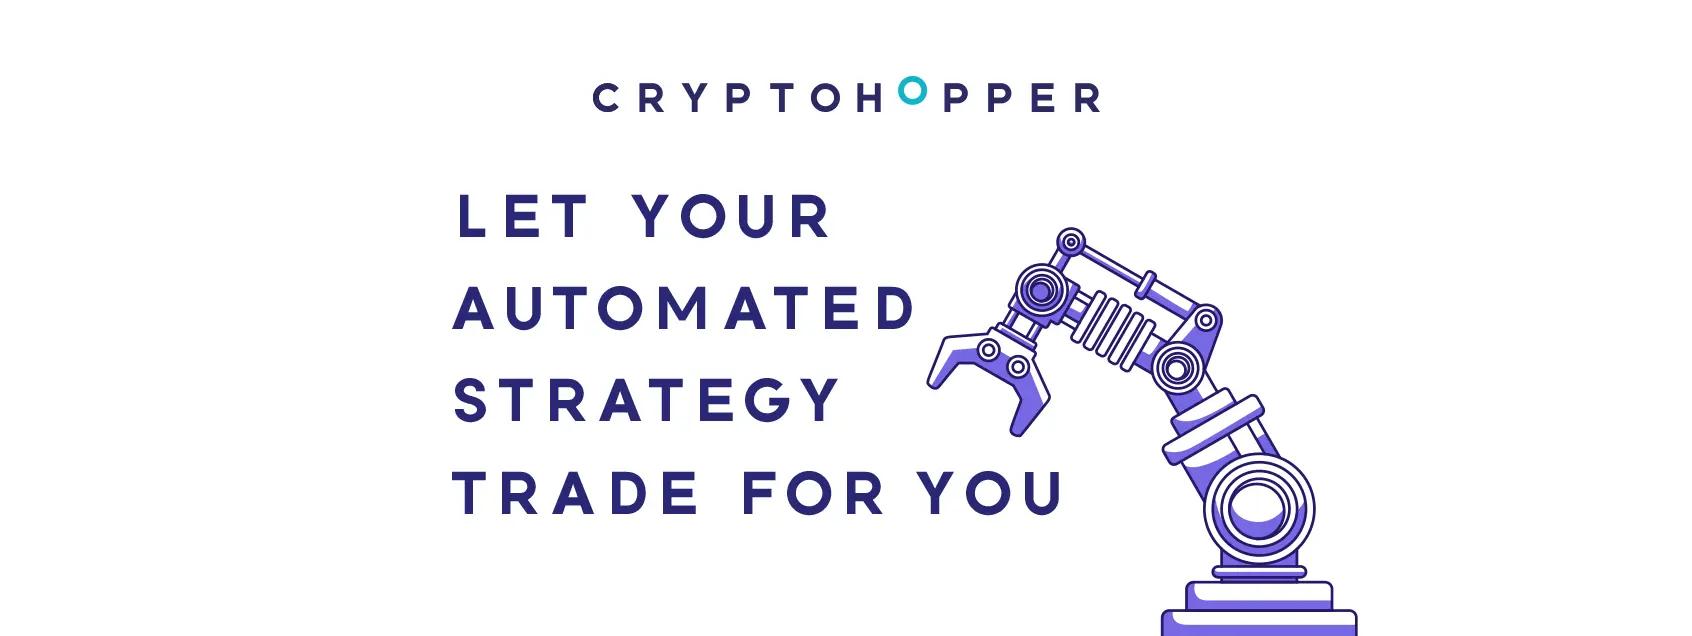 Let Your Automated Strategy Trade For You